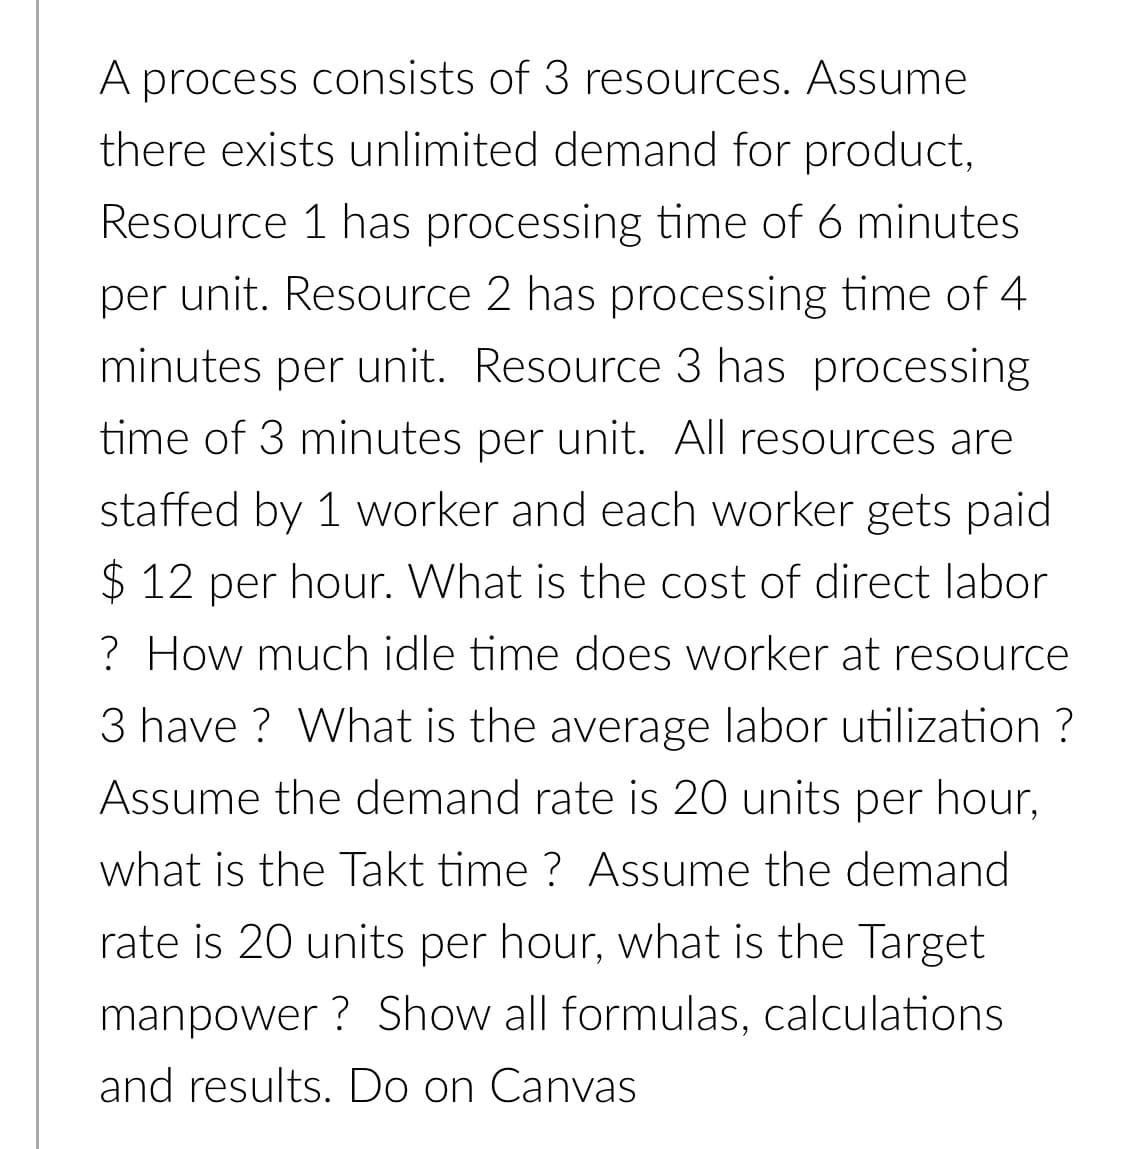 A process consists of 3 resources. Assume
there exists unlimited demand for product,
Resource 1 has processing time of 6 minutes
per unit. Resource 2 has processing time of 4
minutes per unit. Resource 3 has processing
time of 3 minutes per unit. All resources are
staffed by 1 worker and each worker gets paid
$ 12 per hour. What is the cost of direct labor
? How much idle time does worker at resource
3 have ? What is the average labor utilization ?
Assume the demand rate is 20 units per hour,
what is the Takt time ? Assume the demand
rate is 20 units per hour, what is the Target
manpower ? Show all formulas, calculations
and results. Do on Canvas
